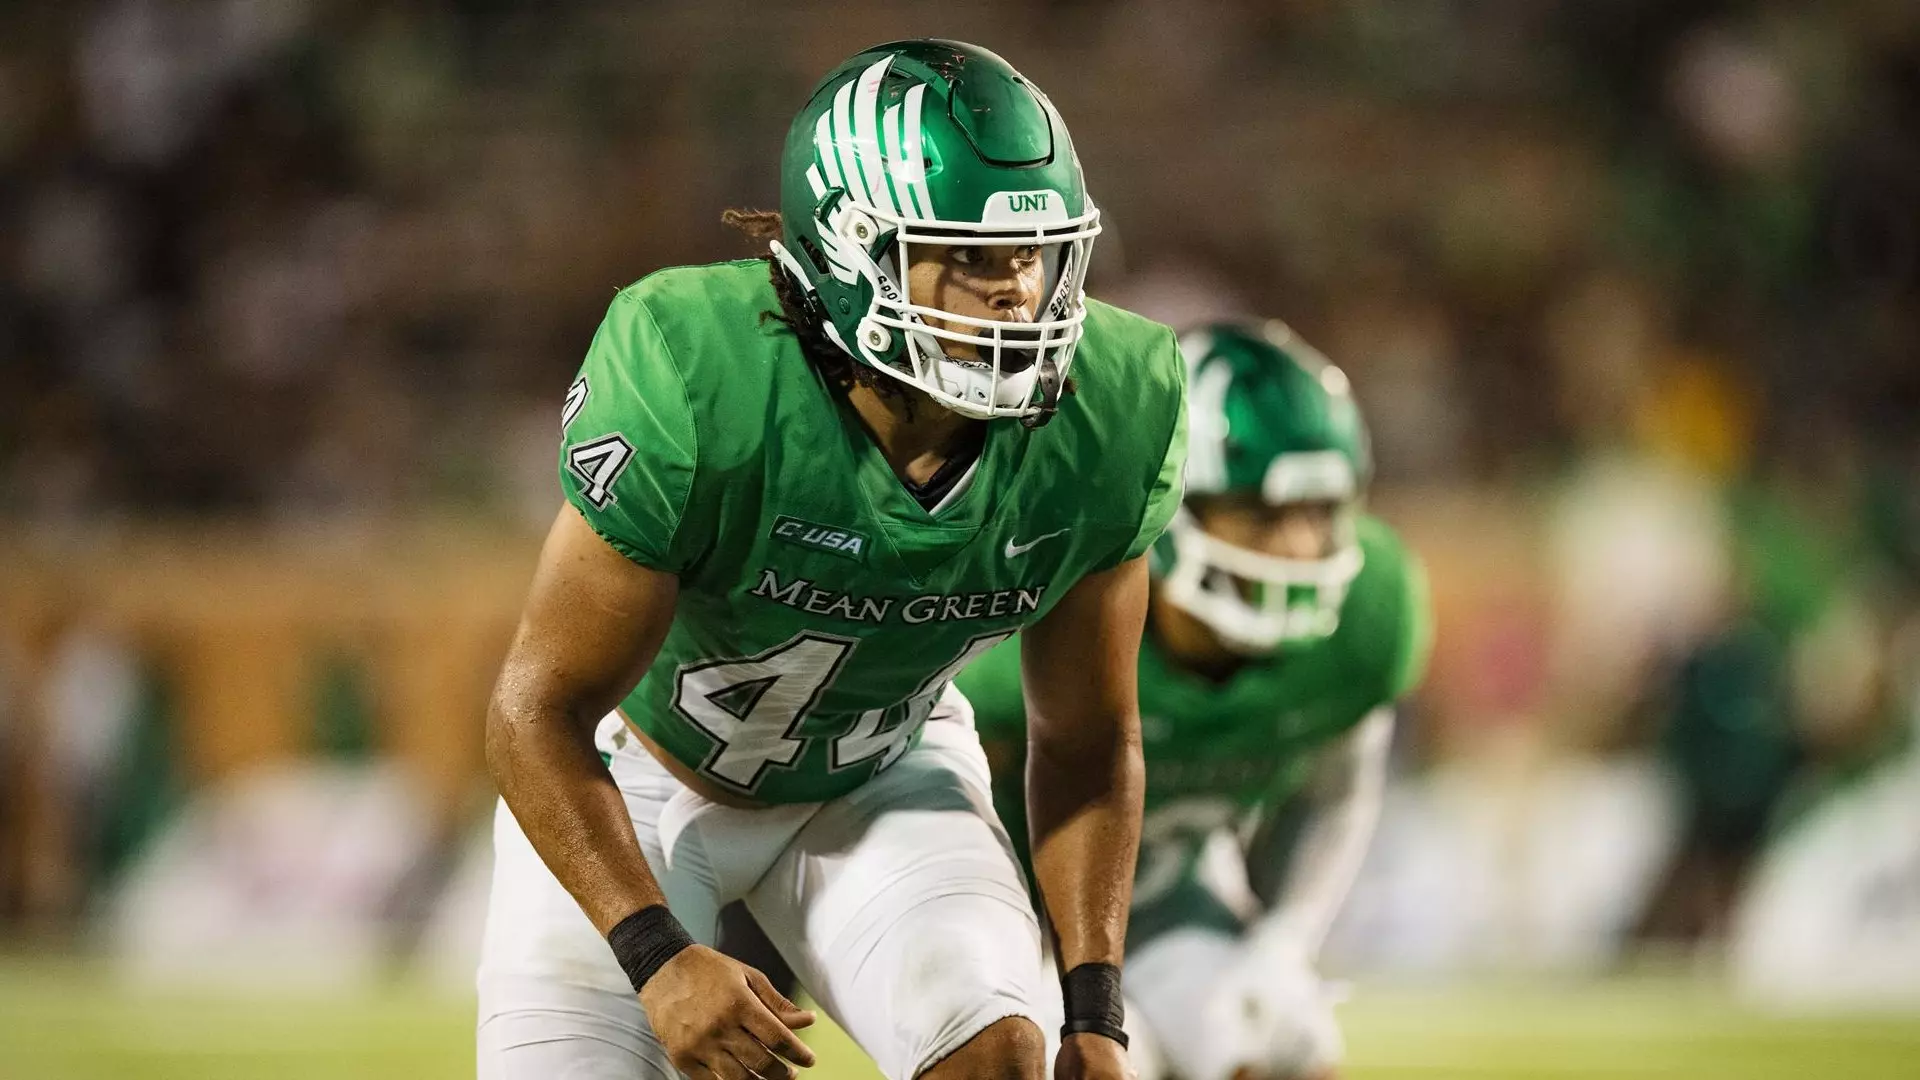 Mazin Richards displays great motor and intensity as the star edge rusher for North Texas. Hula Bowl scout Elijah Ballew breaks down Richards as an NFL Prospect in his report.